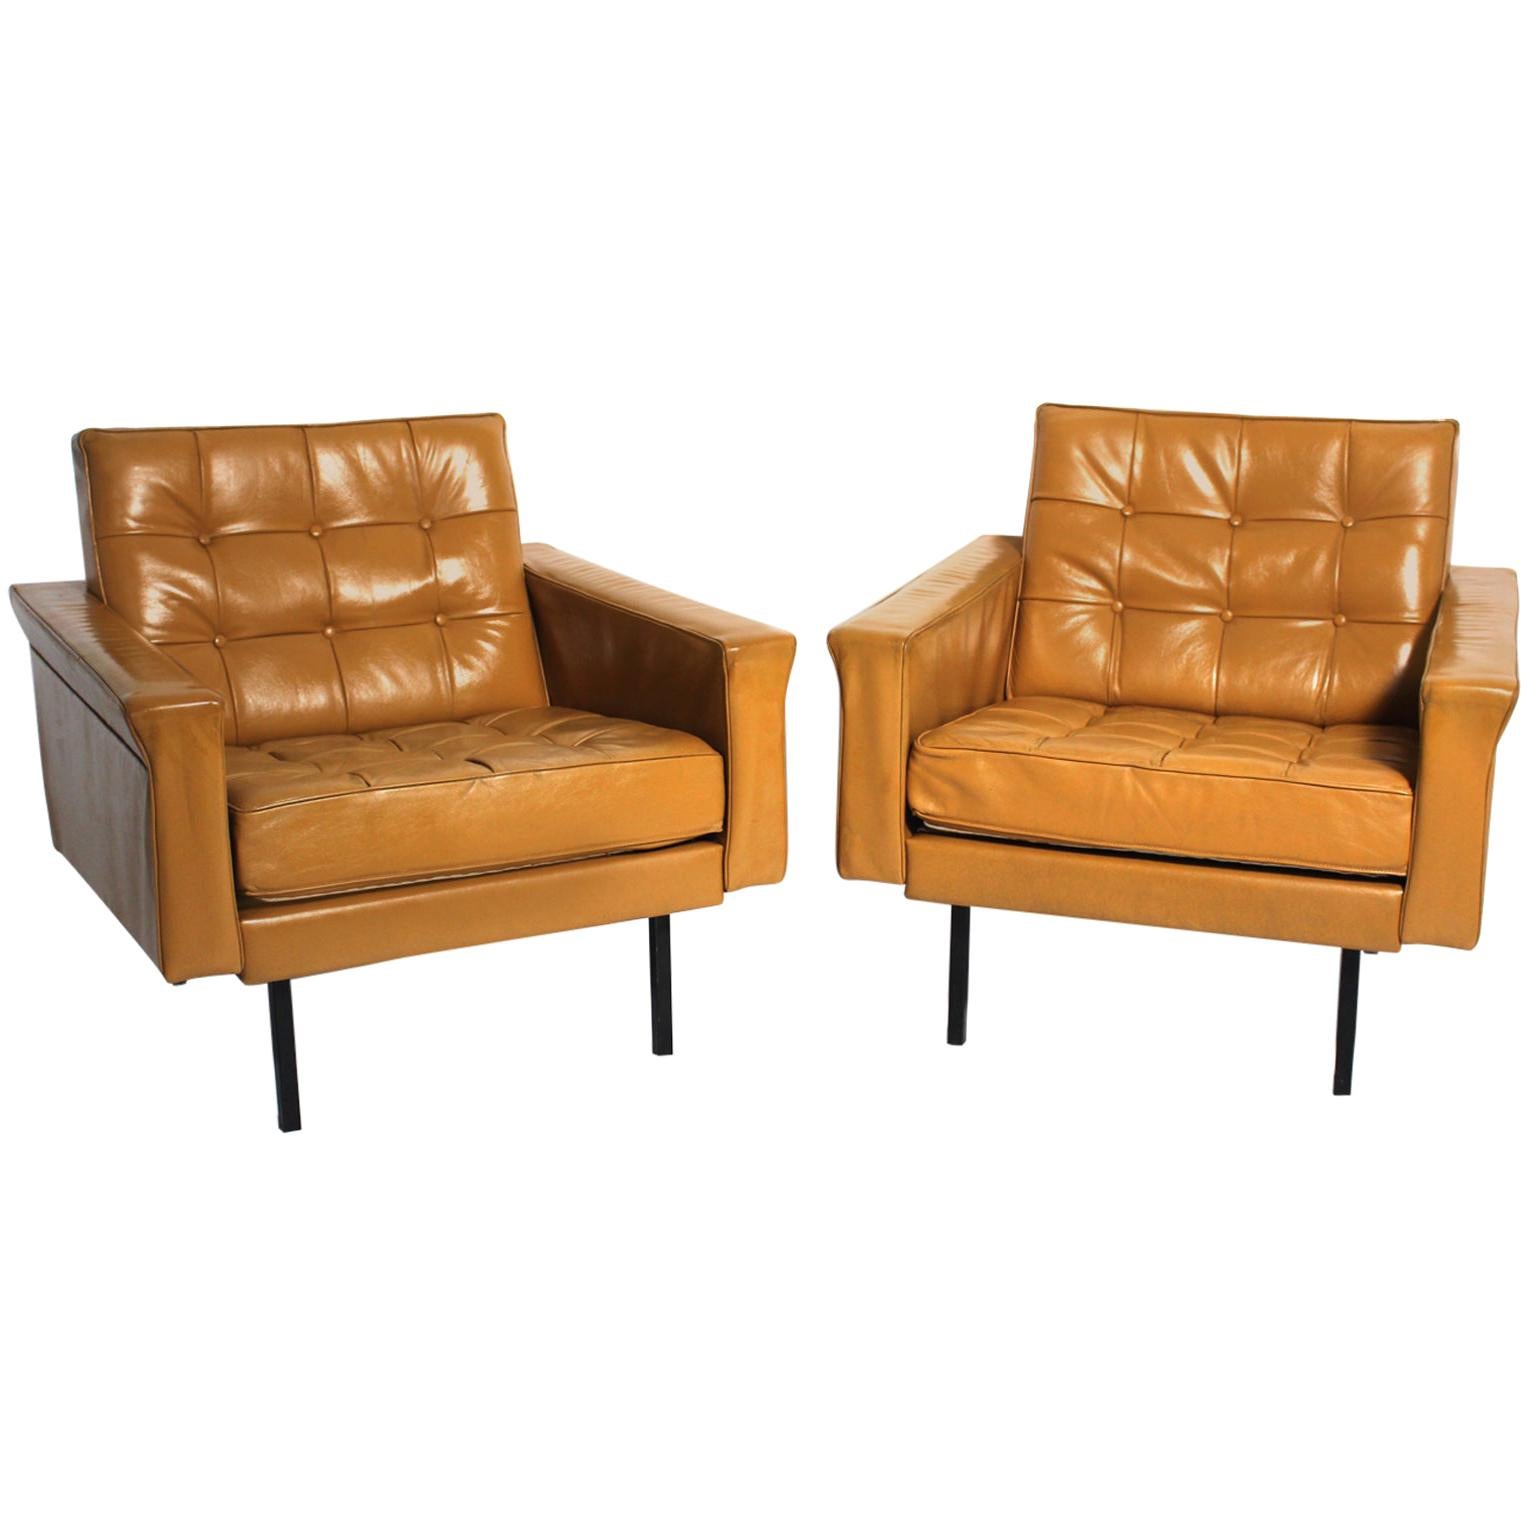 Mid-Century Modern Brown Leather Club Chairs by Johannes Spalt Vienna circa 1959 For Sale